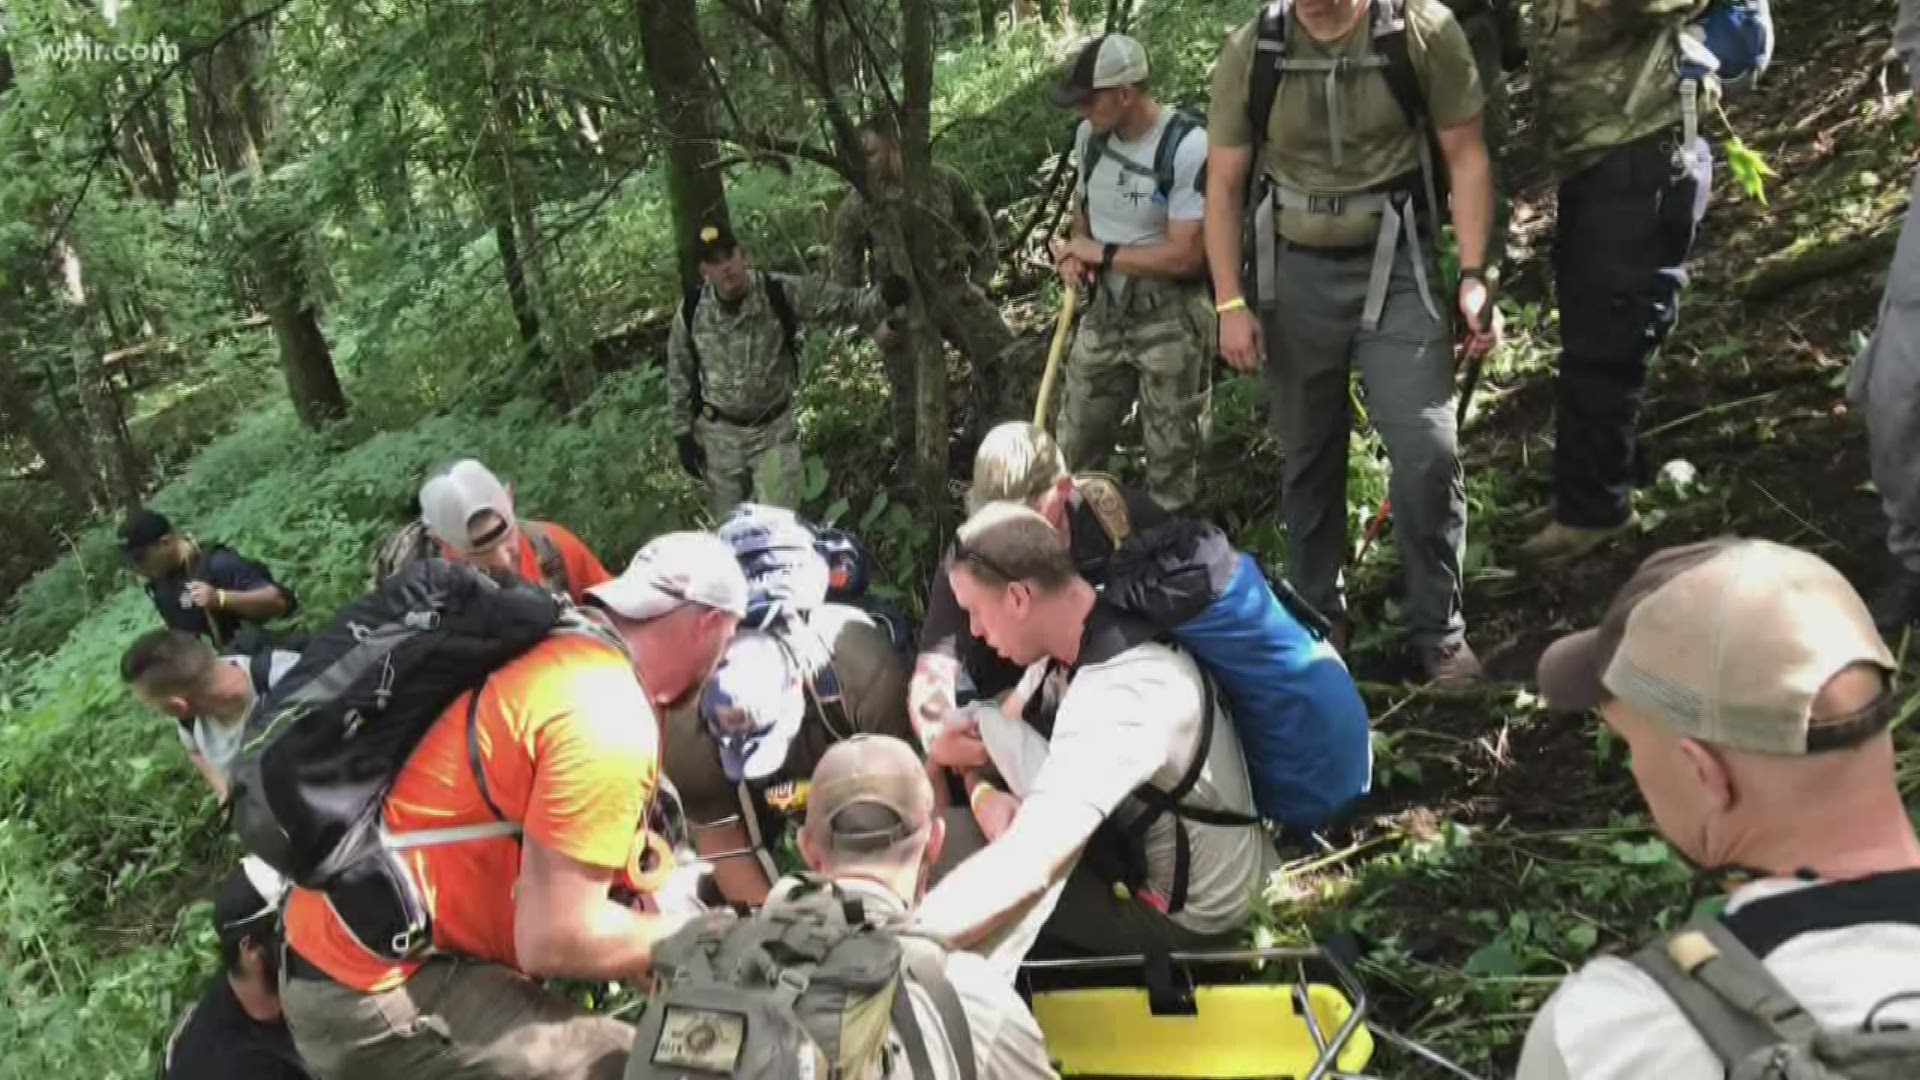 We're hearing from the family of the New Jersey man found alive after spending four nights lost in the Smokies. 58-year-old Kevin Lynch has dementia and is recovering in the hospital.